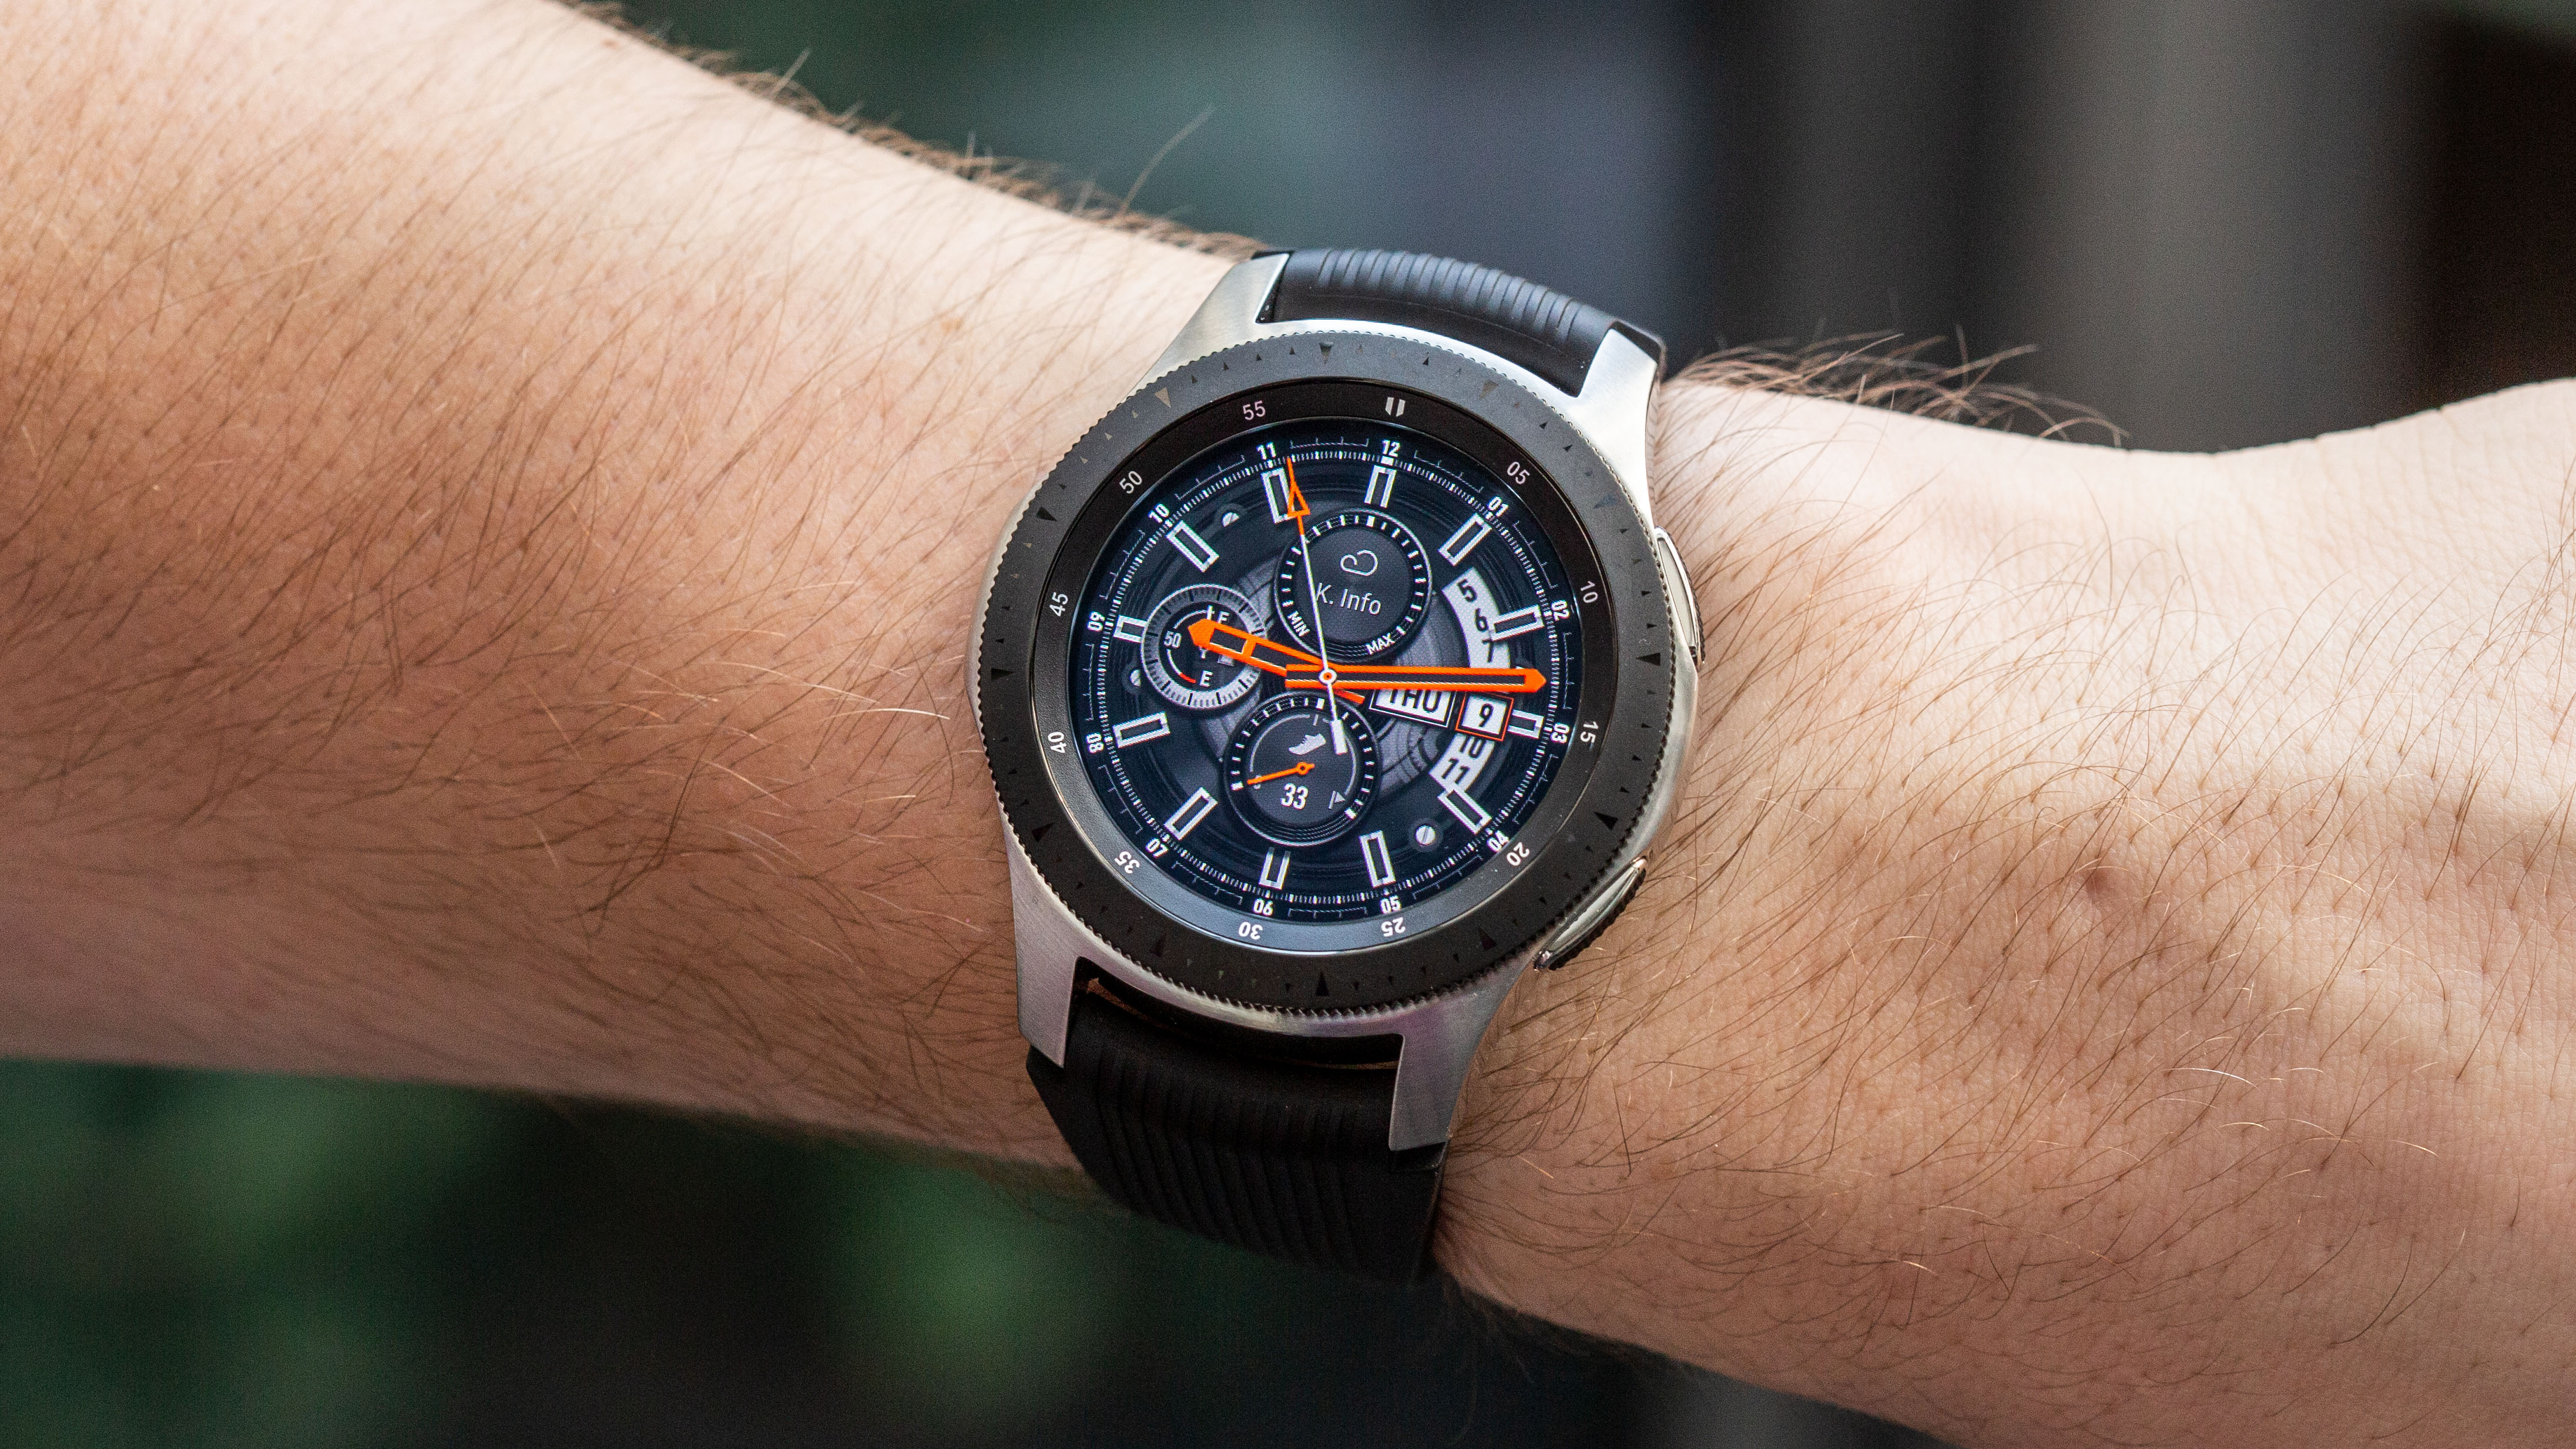 Samsung Galaxy Watch: the premier Android smartwatch ...